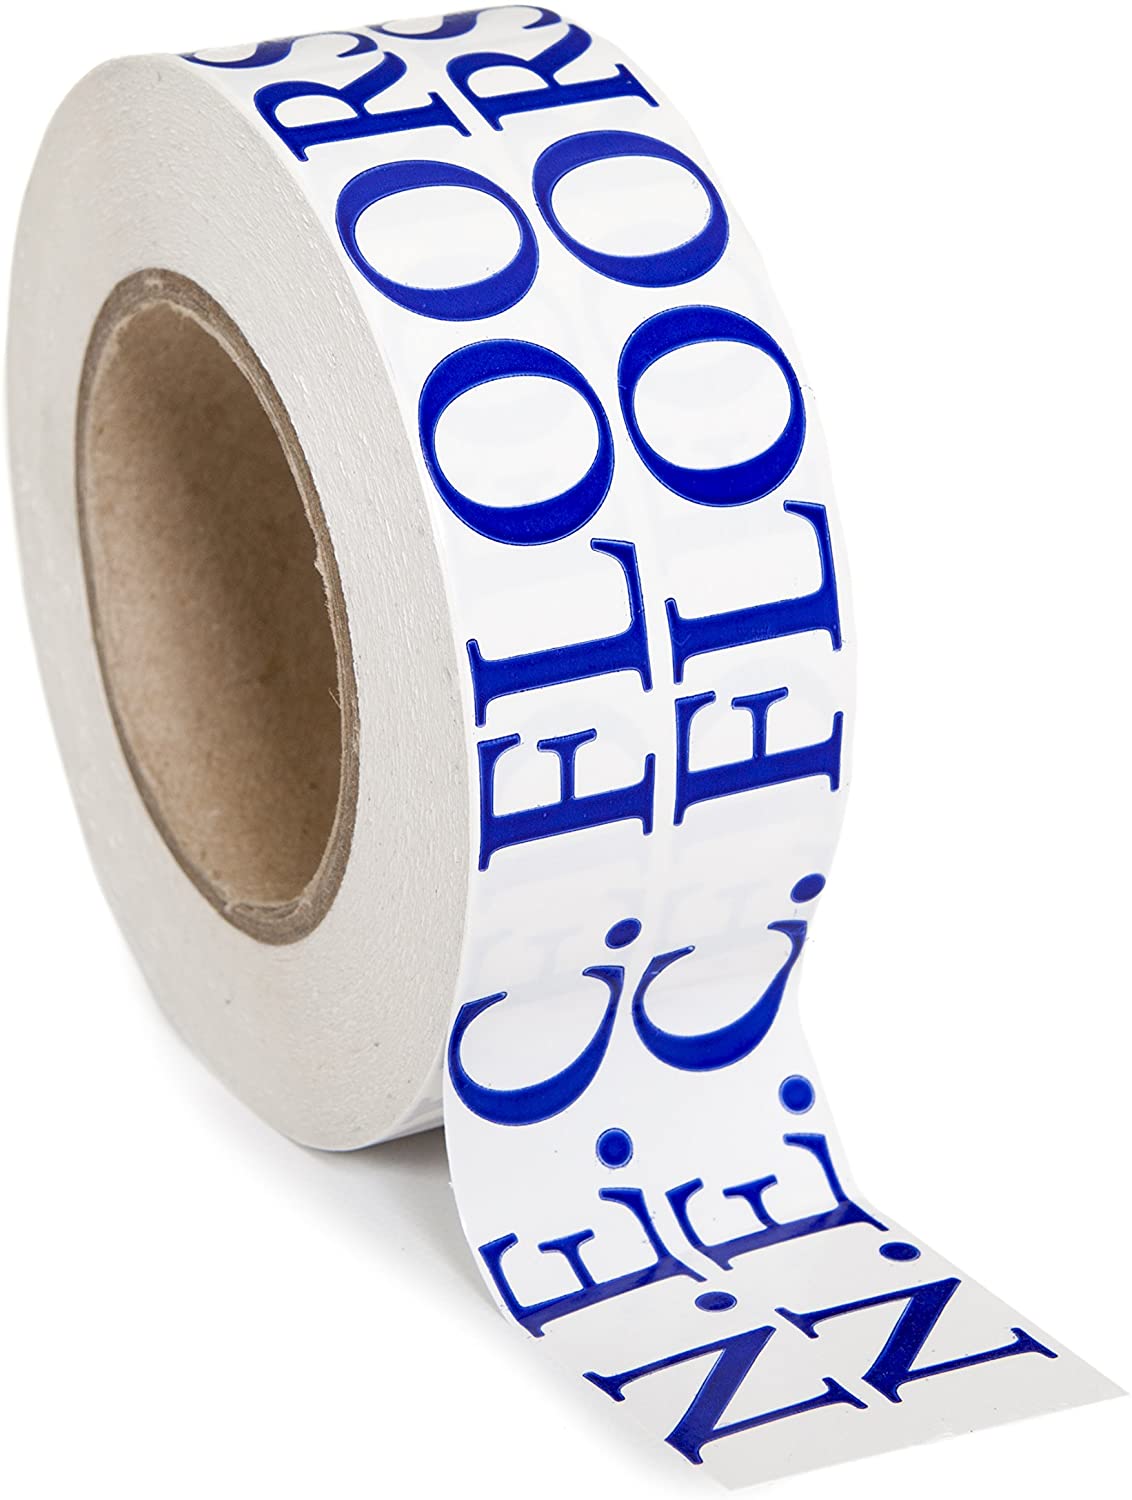 Budget Dance Floor Tape Double Sided NEC Approved